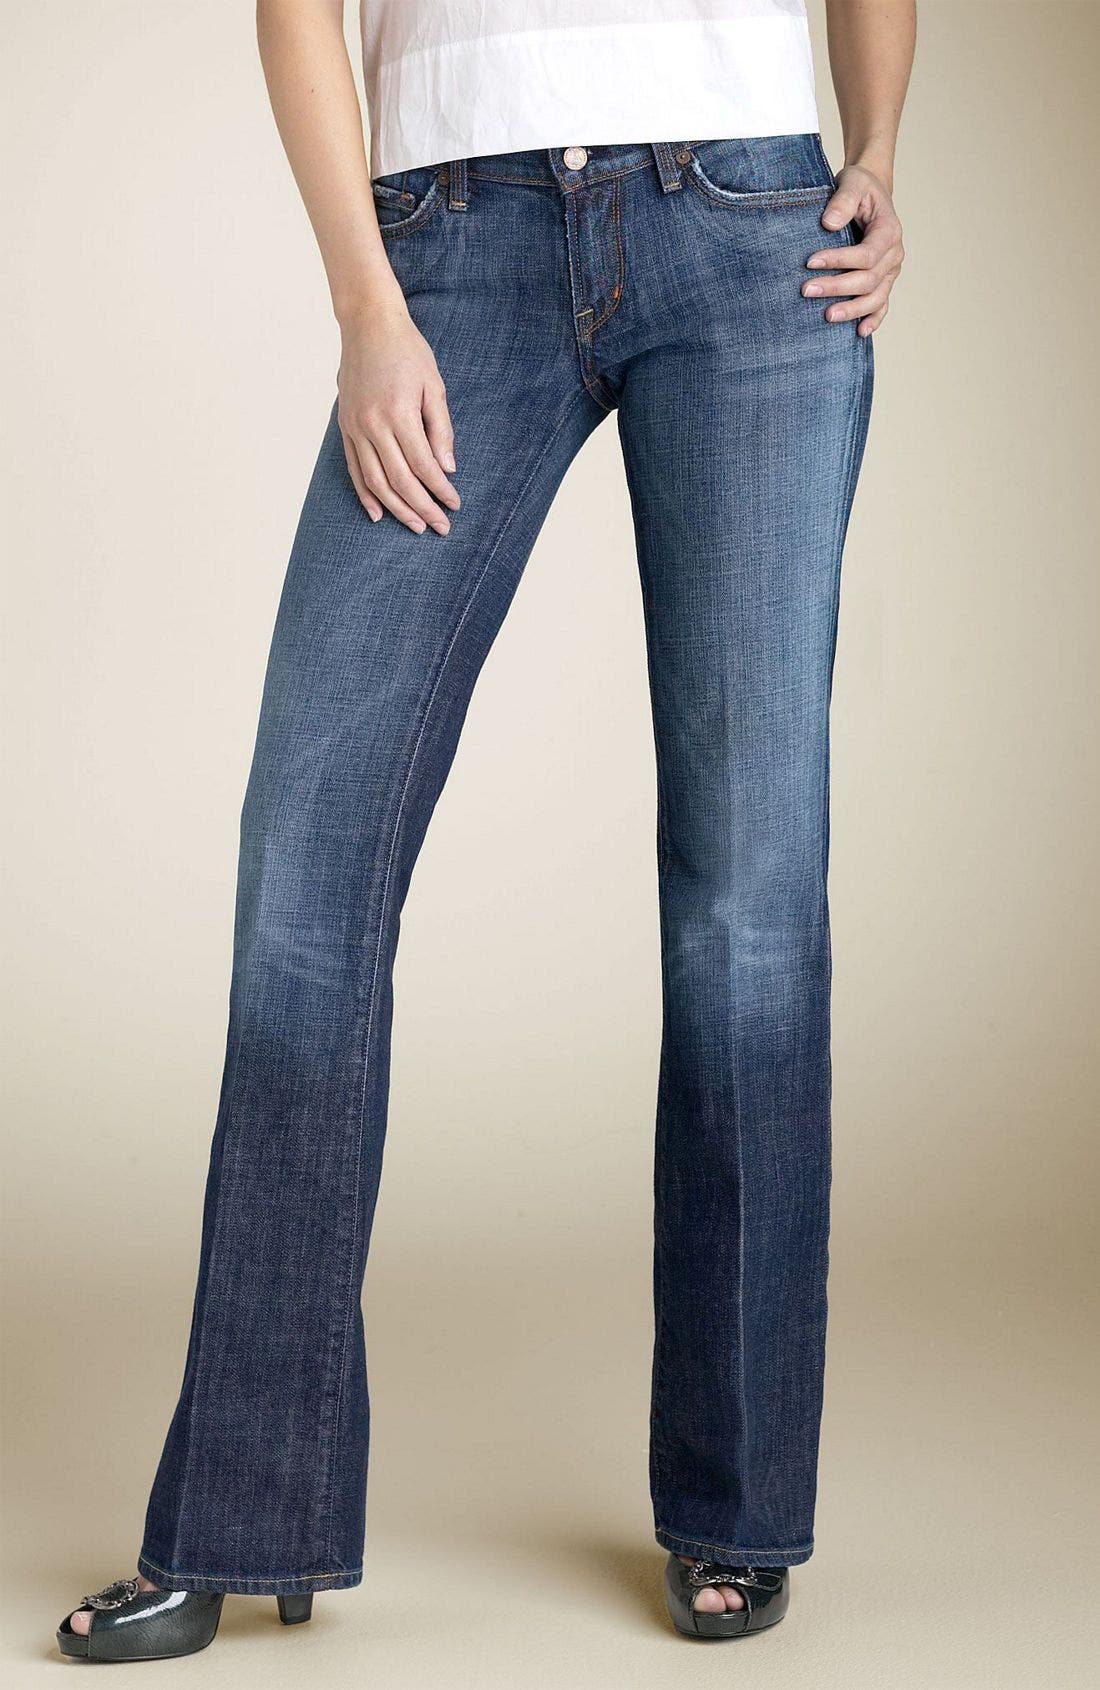 universal store jeans